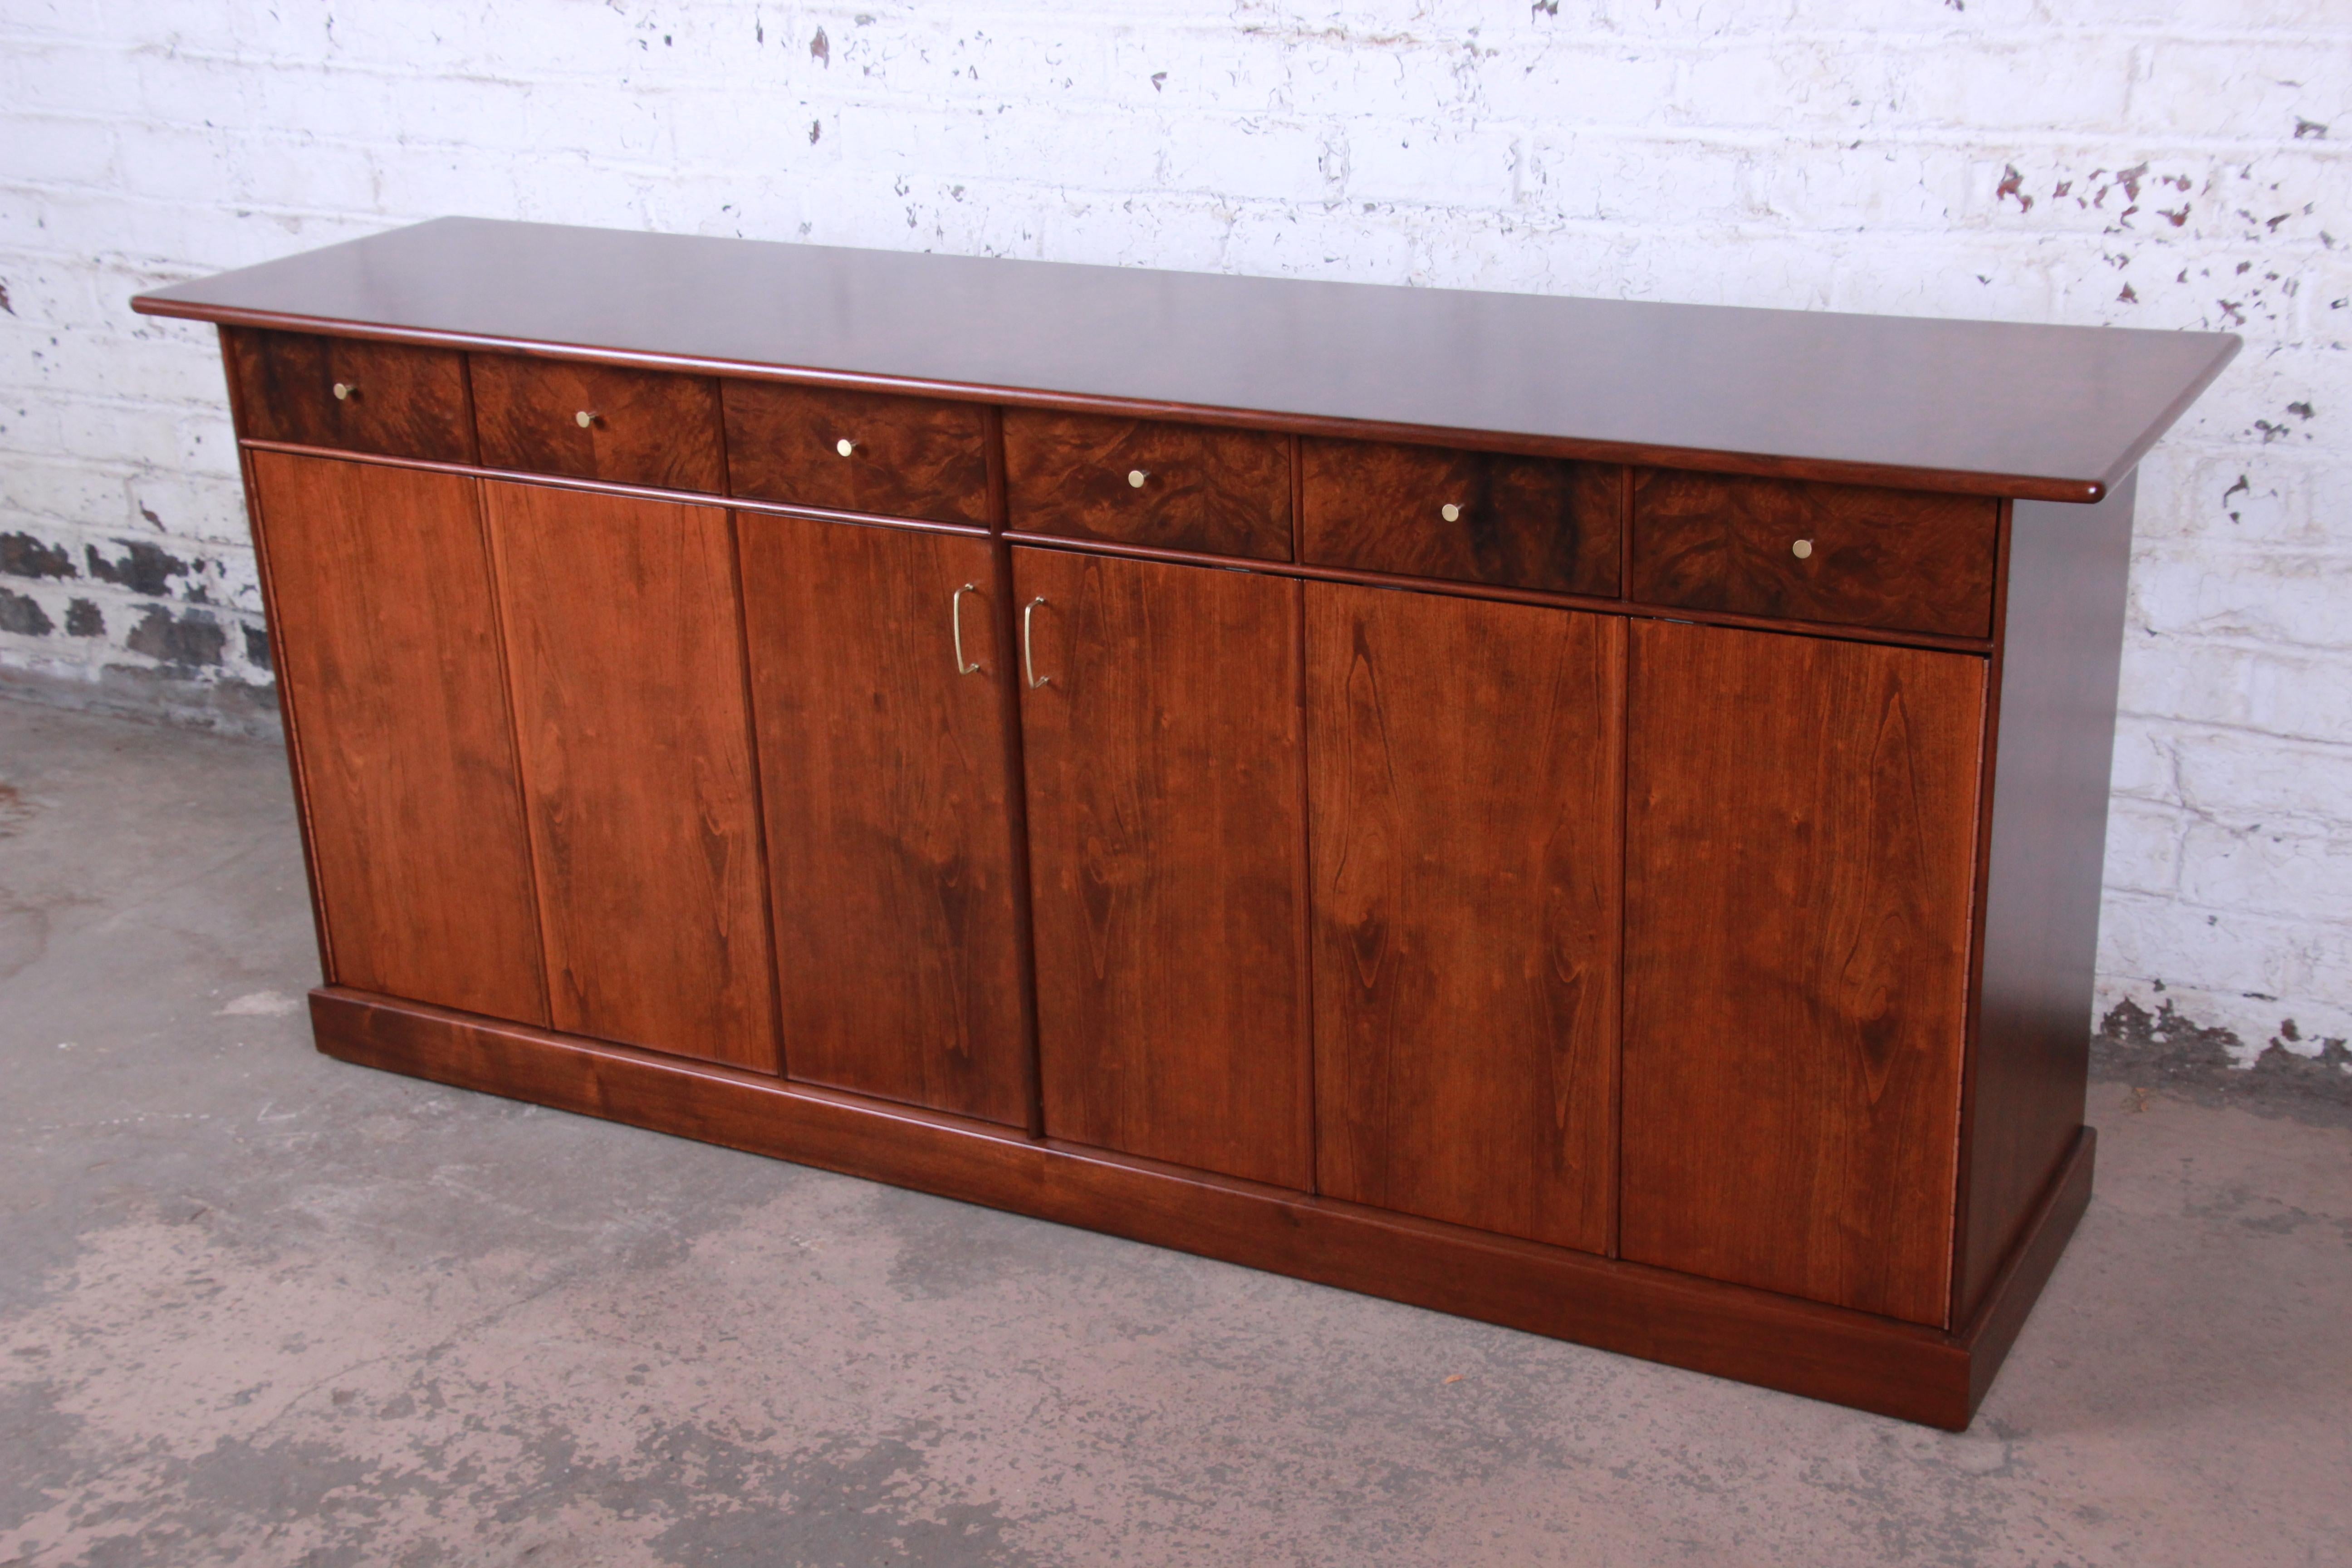 A rare and outstanding Mid-Century Modern dresser or credenza designed by Milo Baughman for his Country Villa collection for Directional. The dresser features stunning and rich wood grain in cherrywood and walnut and myrtle burl woods. It offers